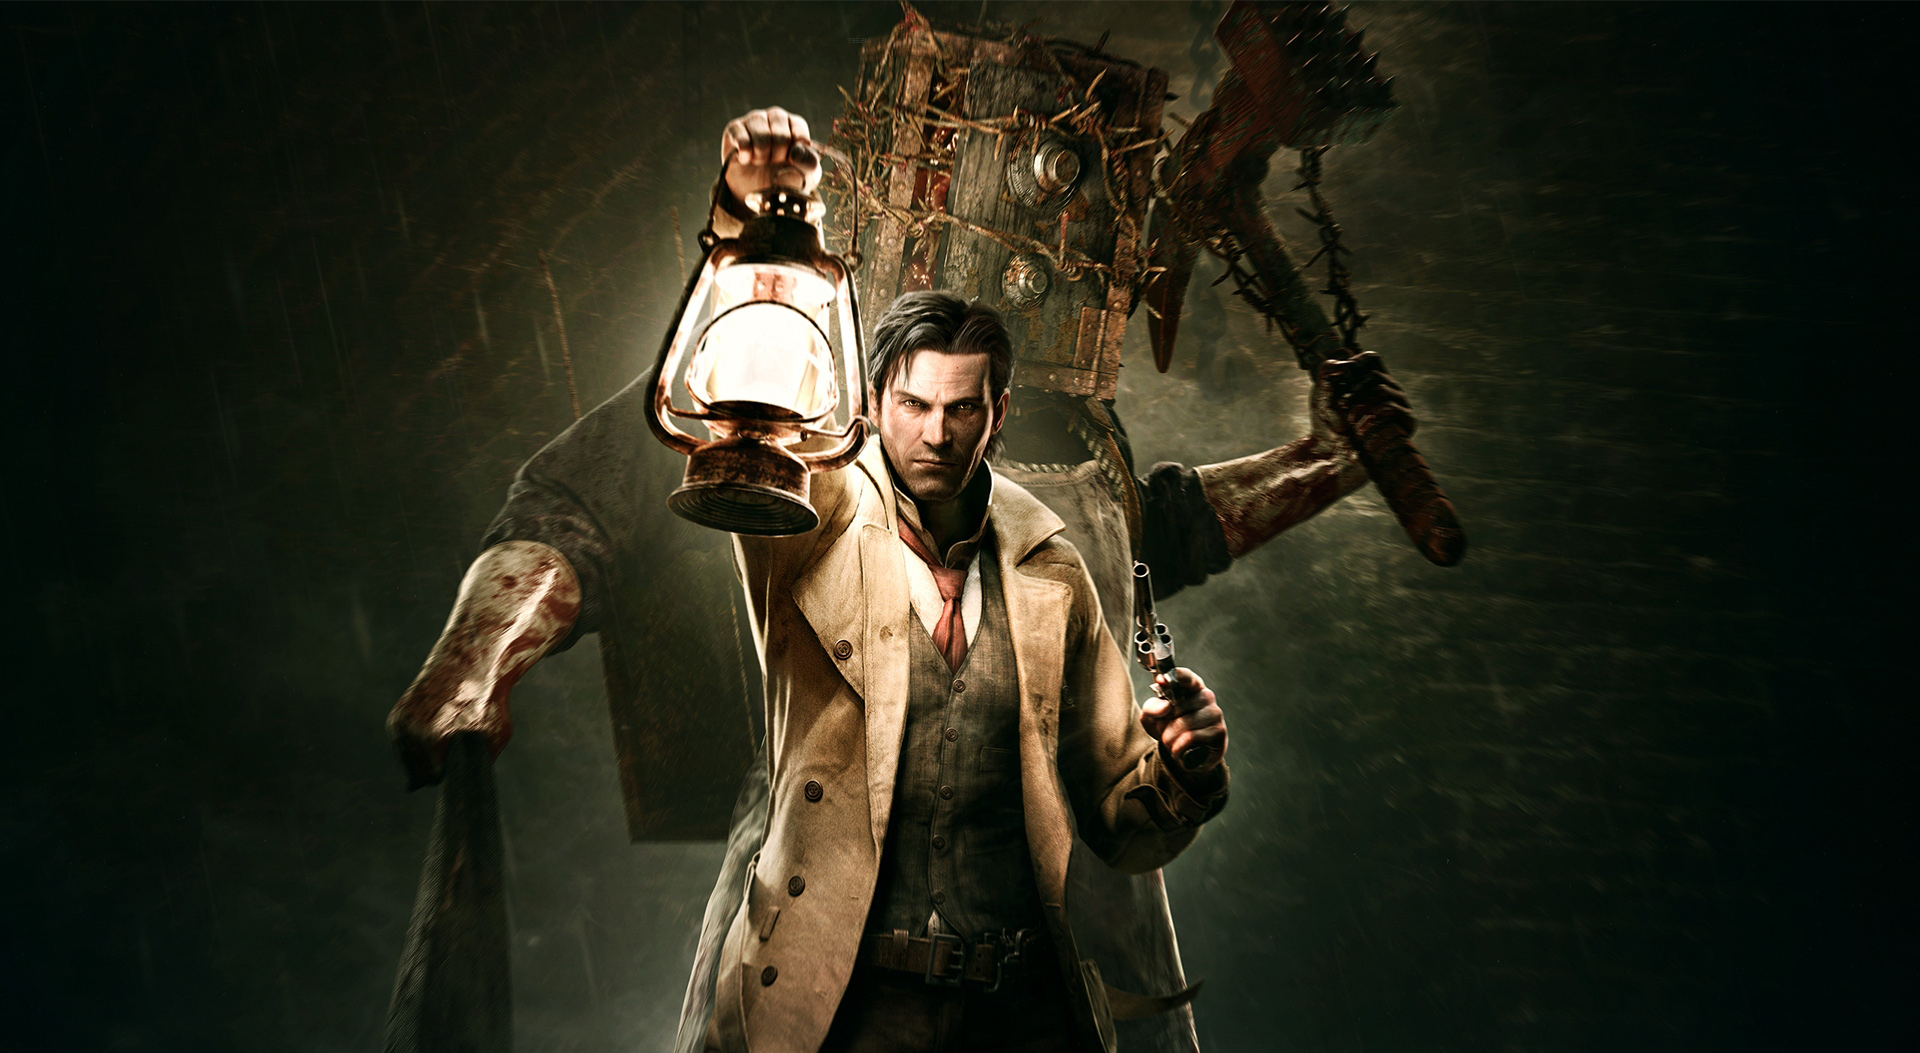 the evil within 2 wiki